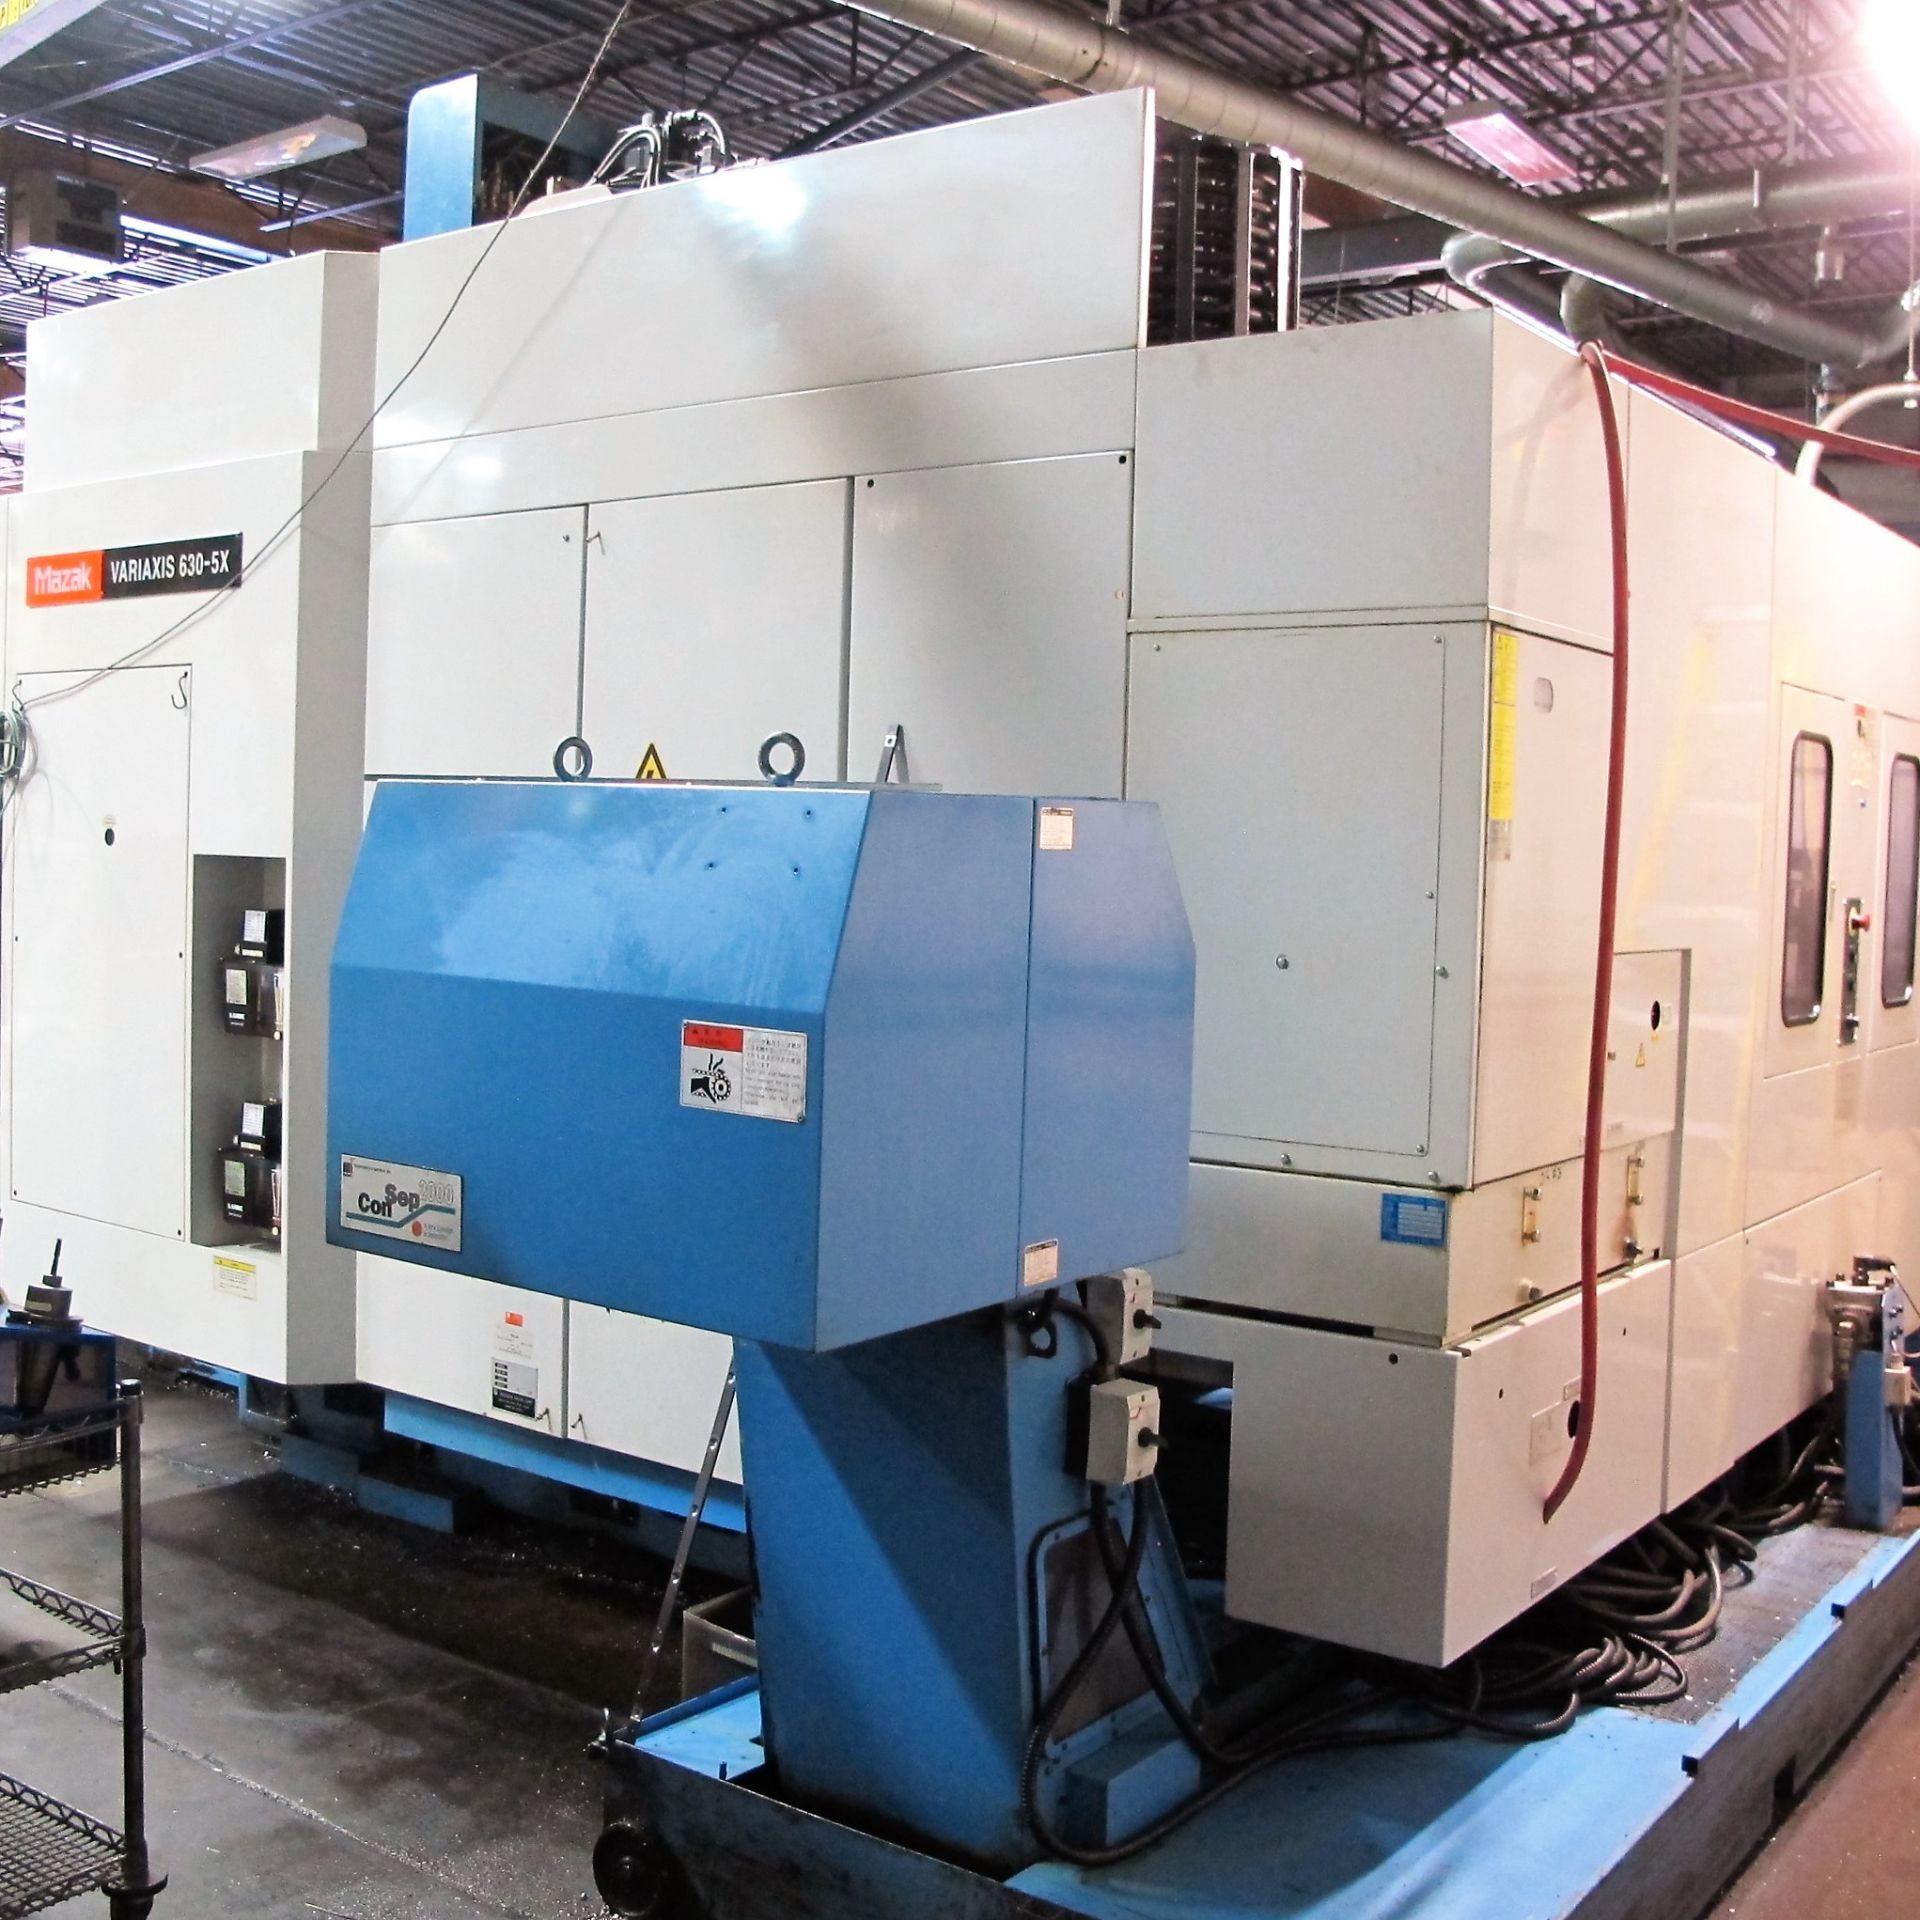 MAZAK VARIAXIS 630-5X CNC 5-AXIS VERTICAL MACHINING CENTER W/PALLET CHANGER, S/N 160371, NEW 2002 - Image 16 of 19